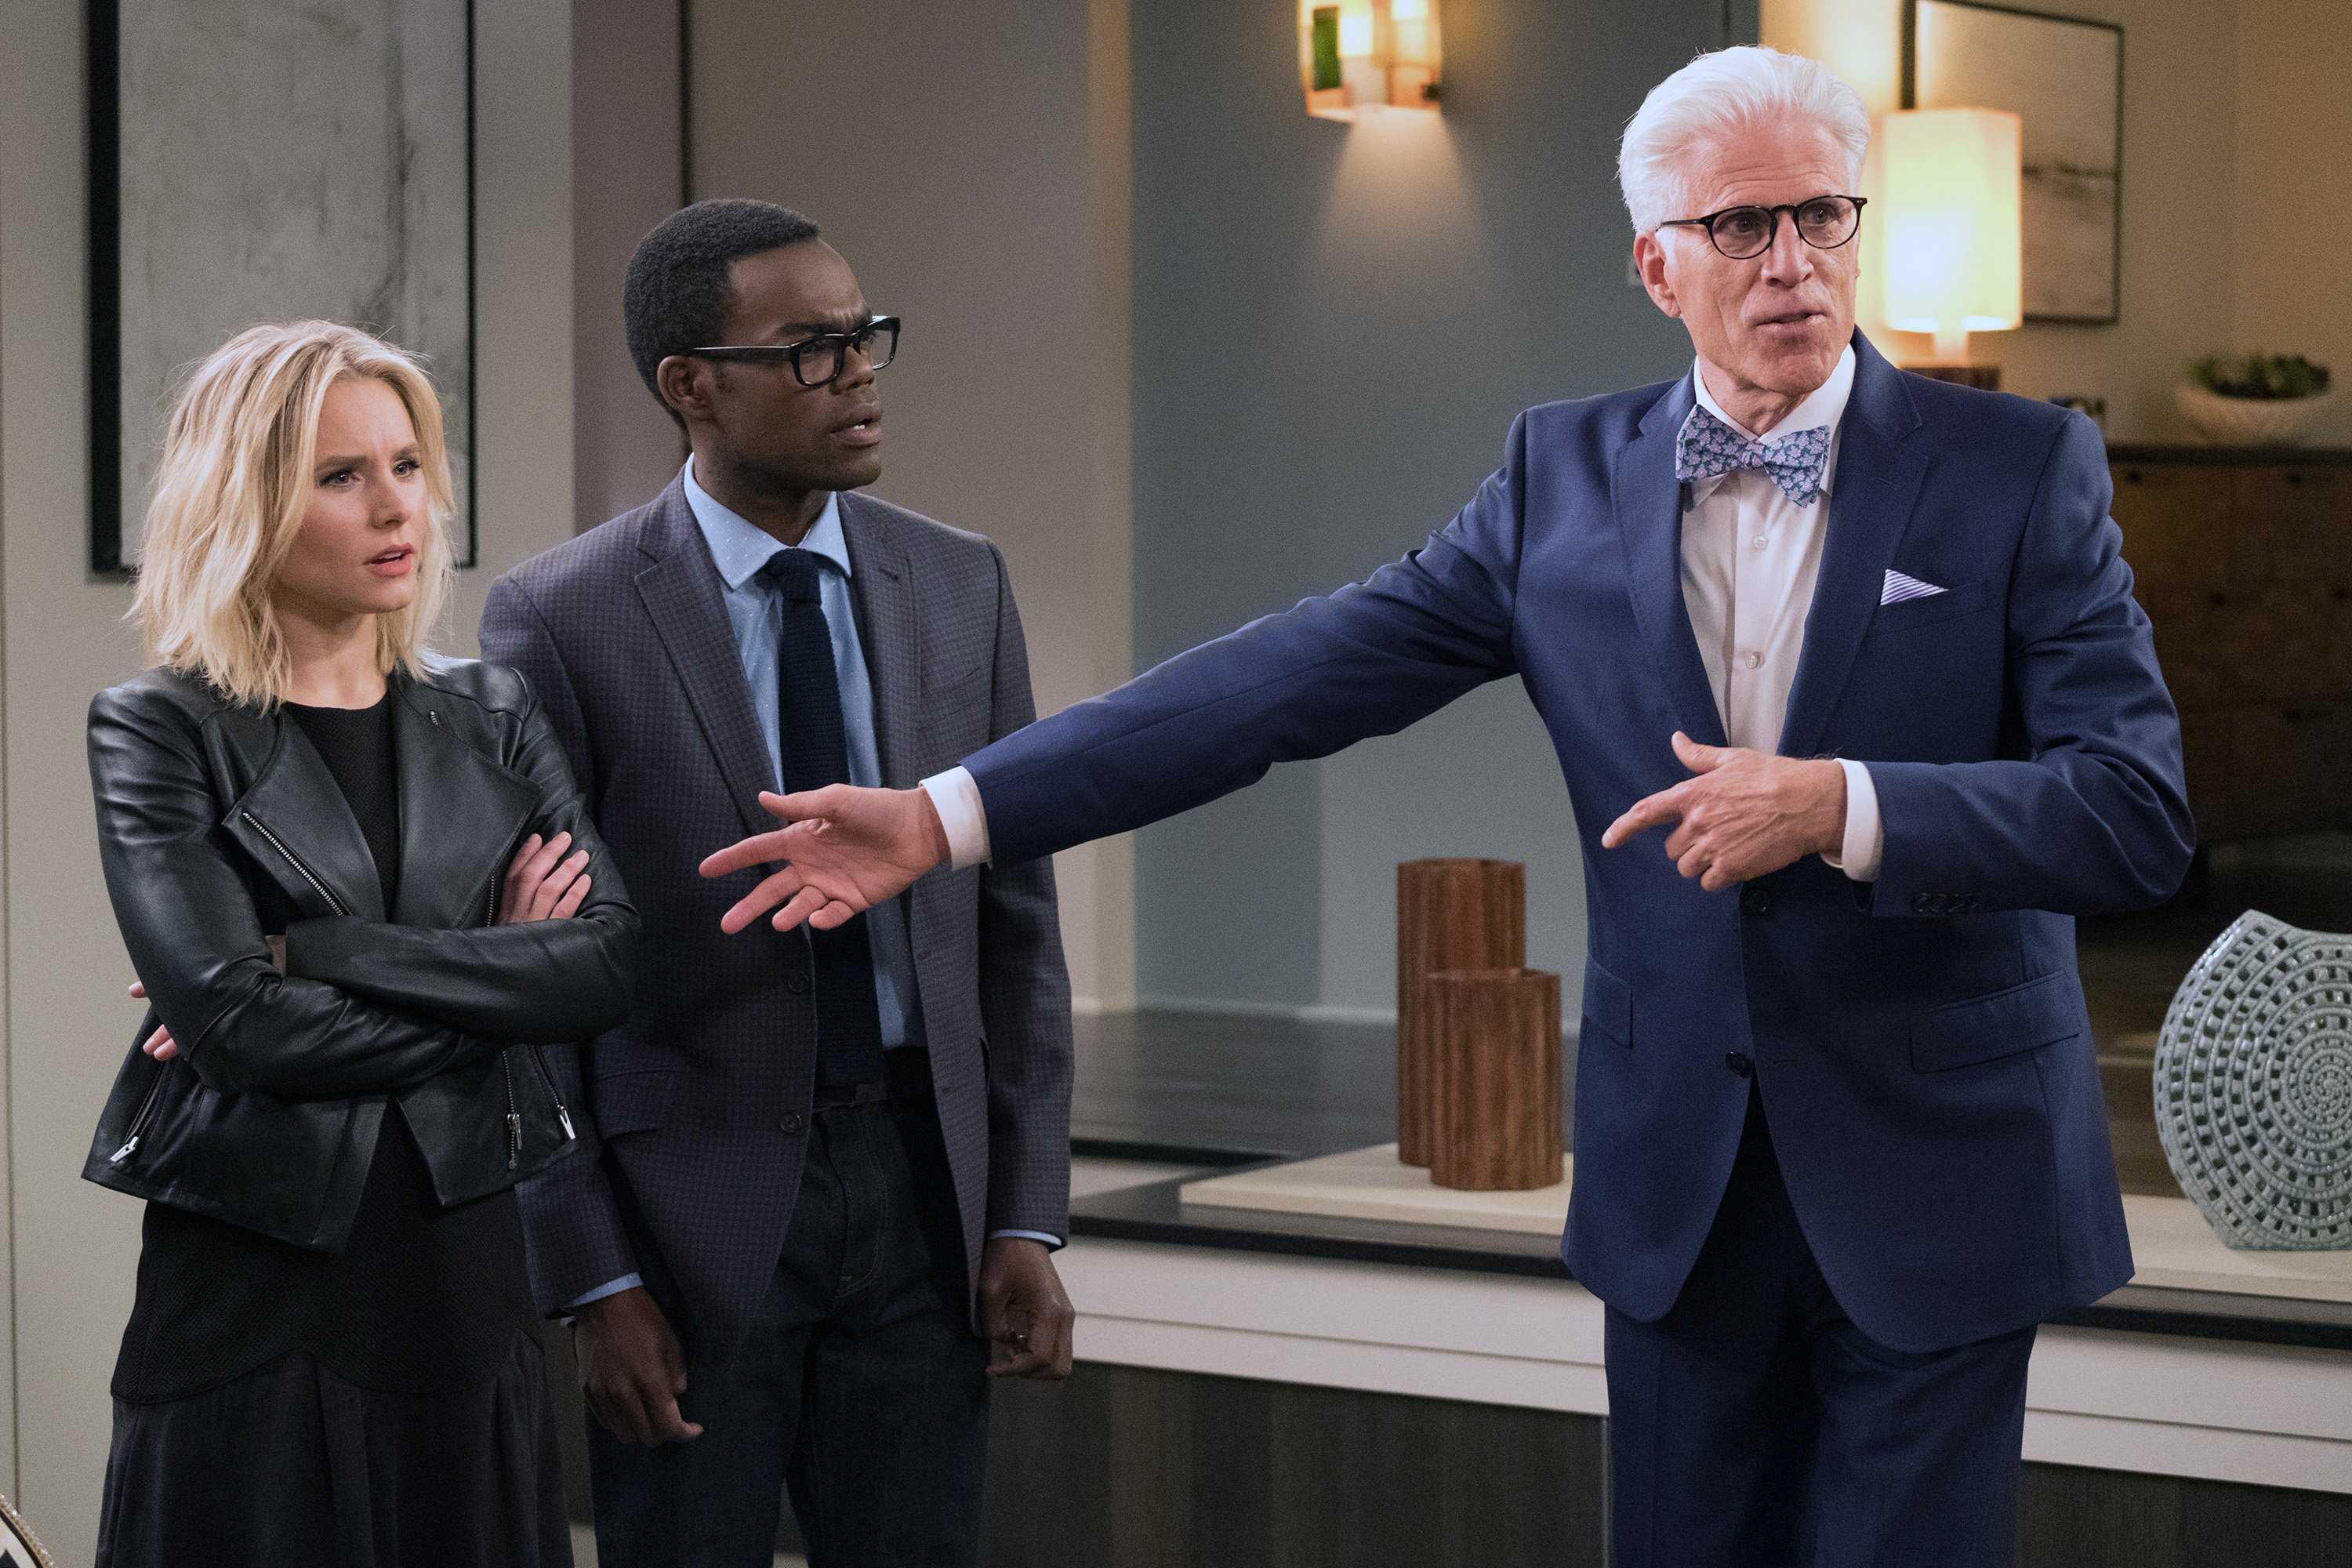 ‘The Good Place’: What’s Next for Kristen Bell, Ted Danson, and William Jackson Harper?